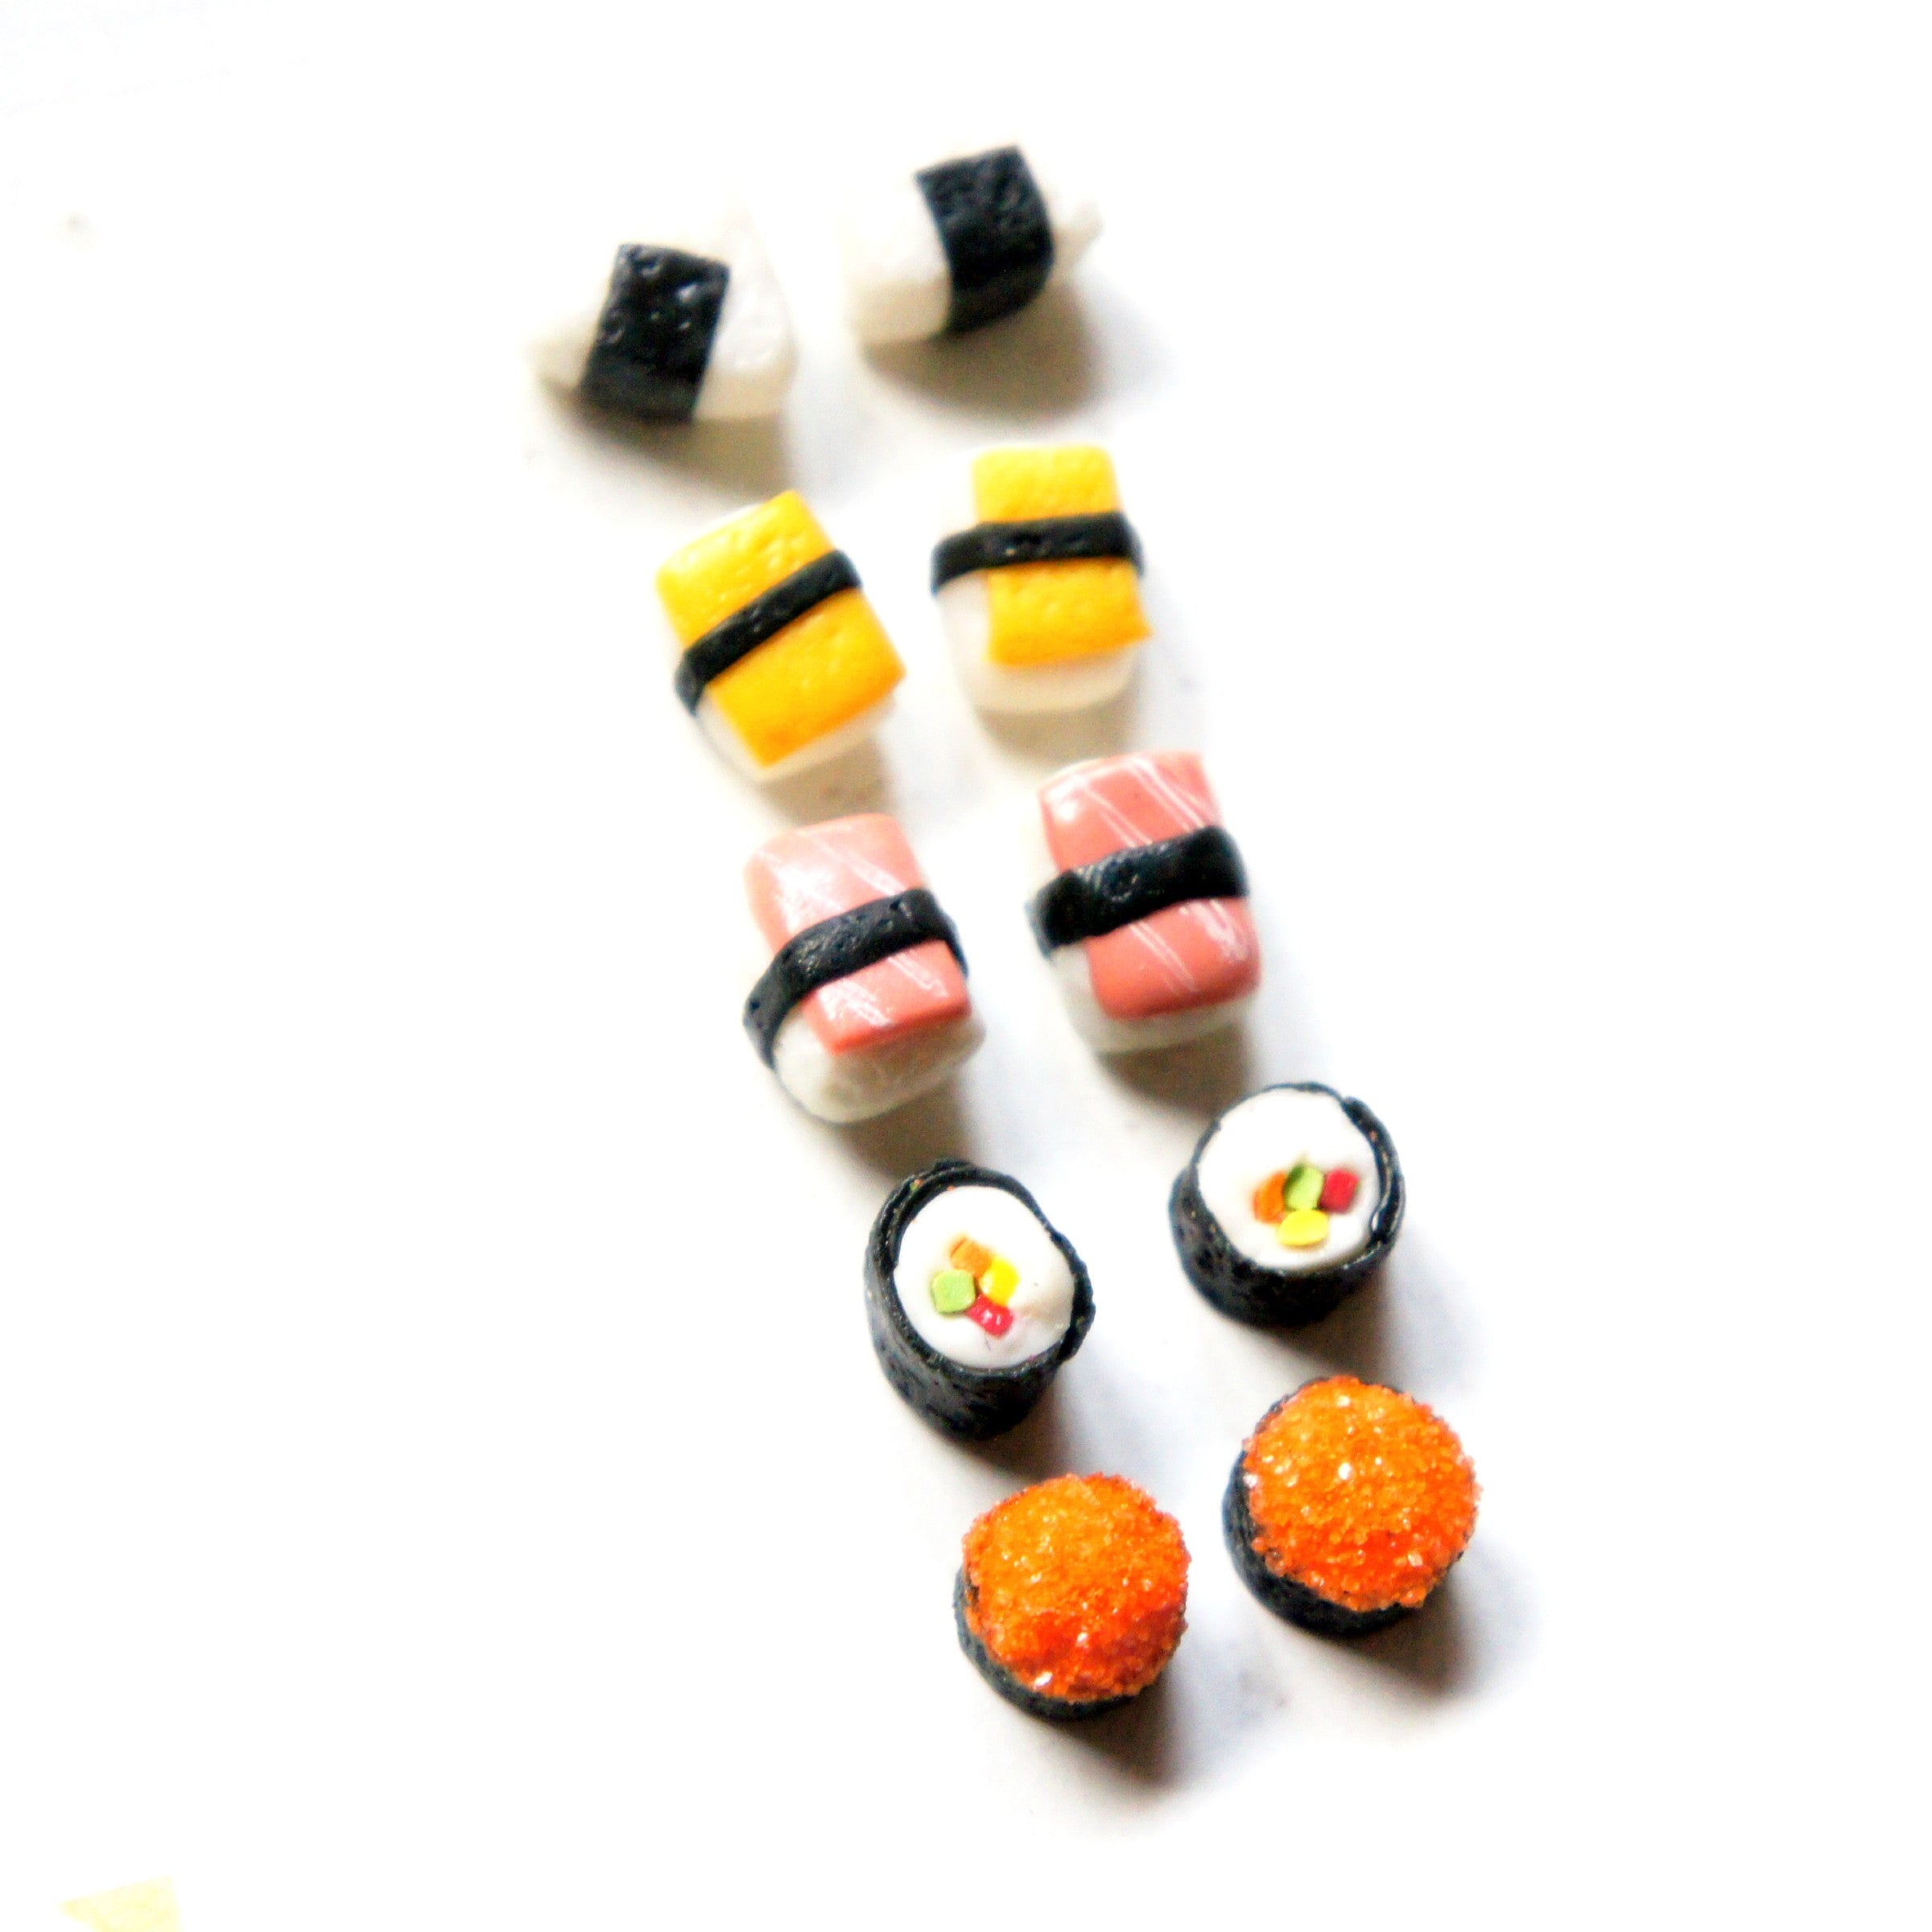 Sushi Sampler Stud Earrings - Jillicious charms and accessories